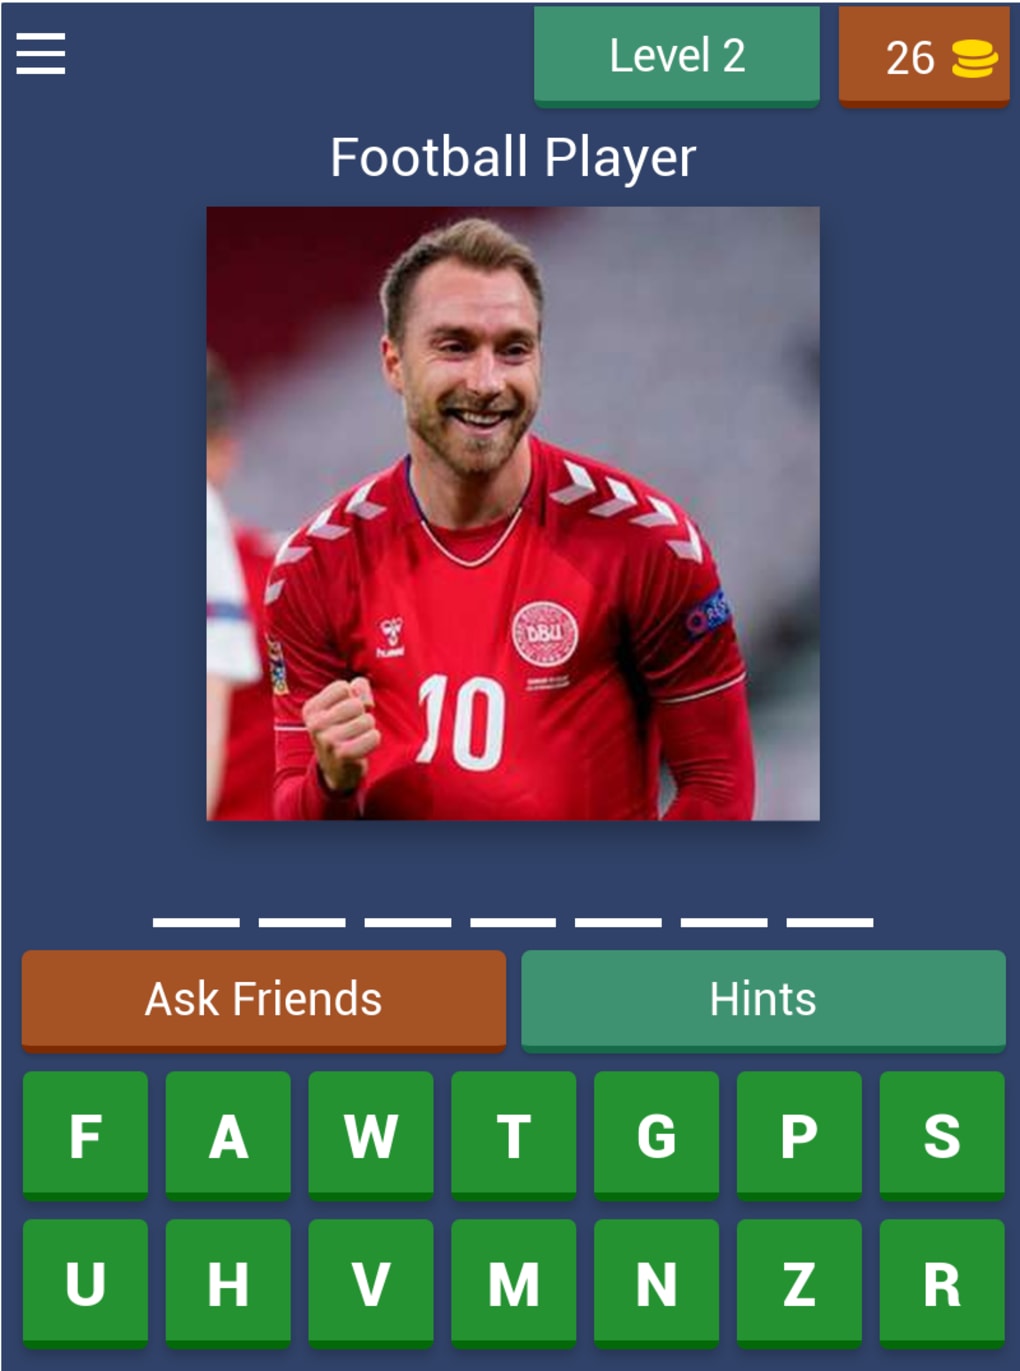 SOCCER QUIZ: Guess the football club APK for Android Download